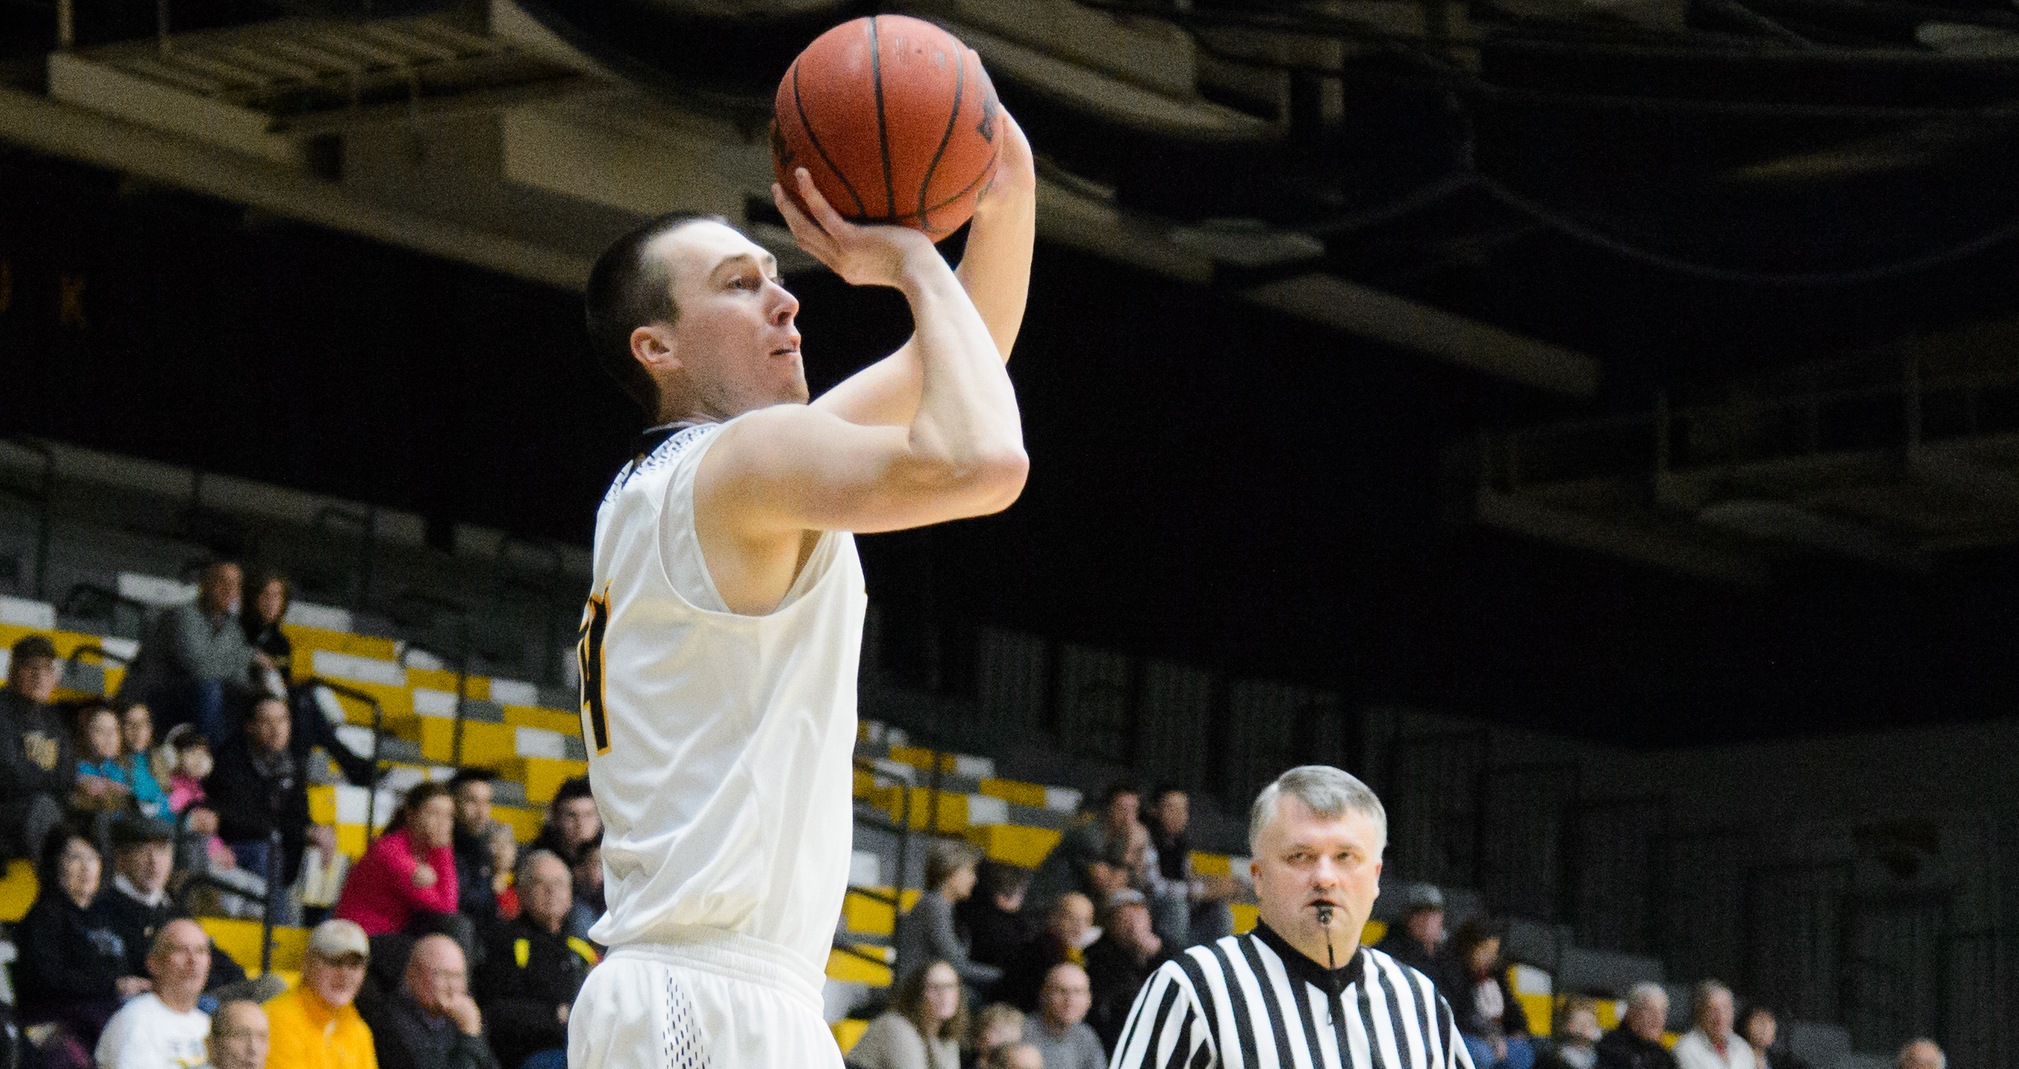 Sean Dwyer scored three points and grabbed a team-best five rebounds against the Blugolds.